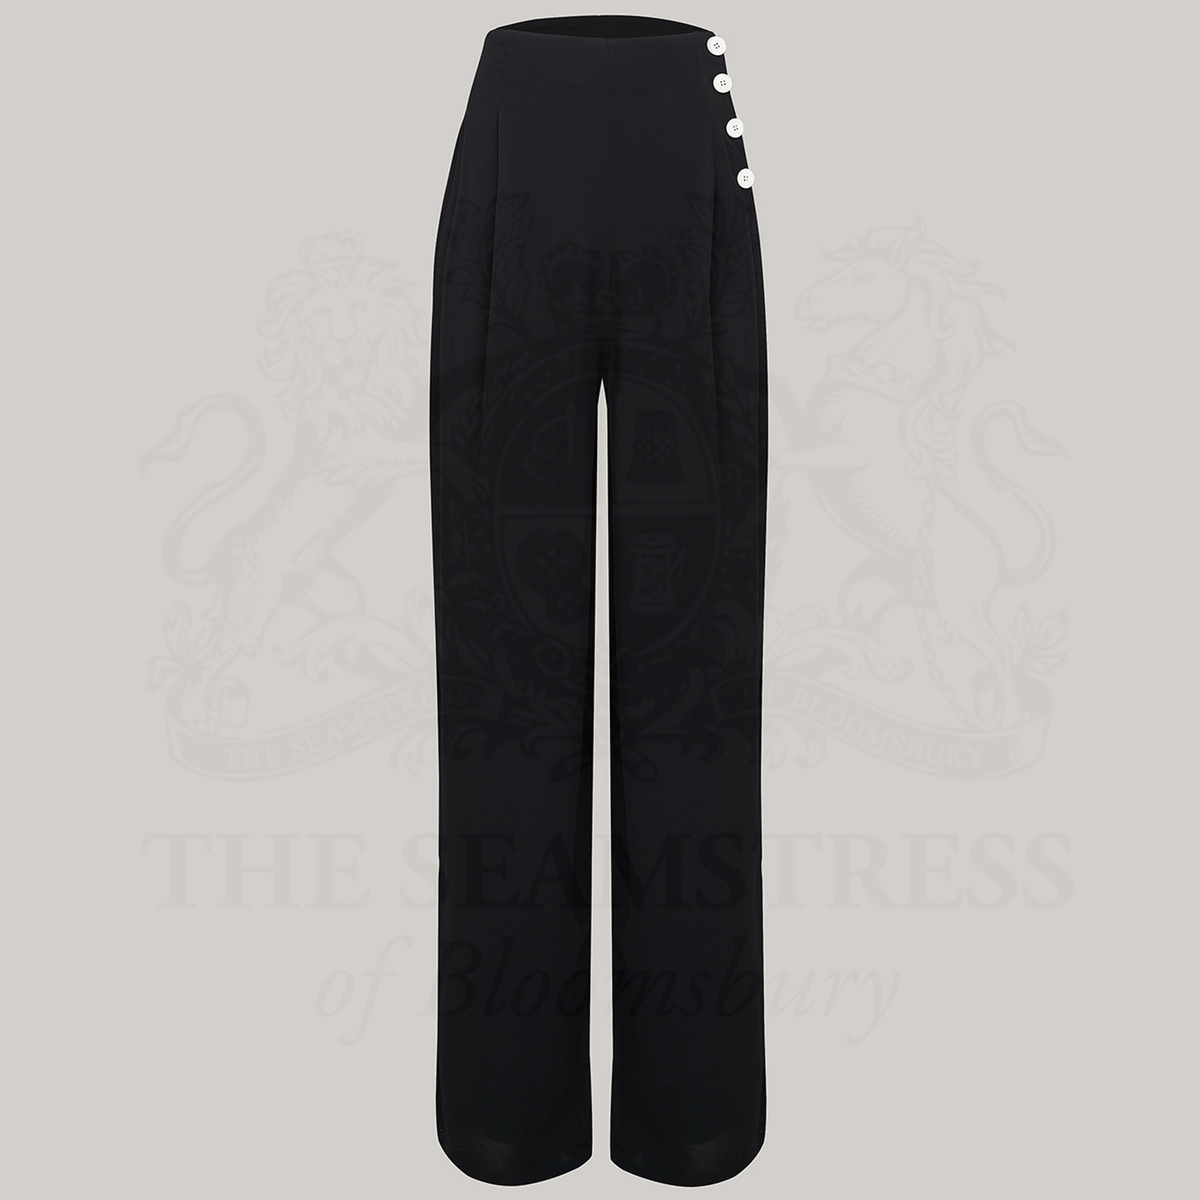 Wide-leg 1940s women’s trousers in black. Four decorative buttons are down the left from the waist with a hidden zip in the side seam. 